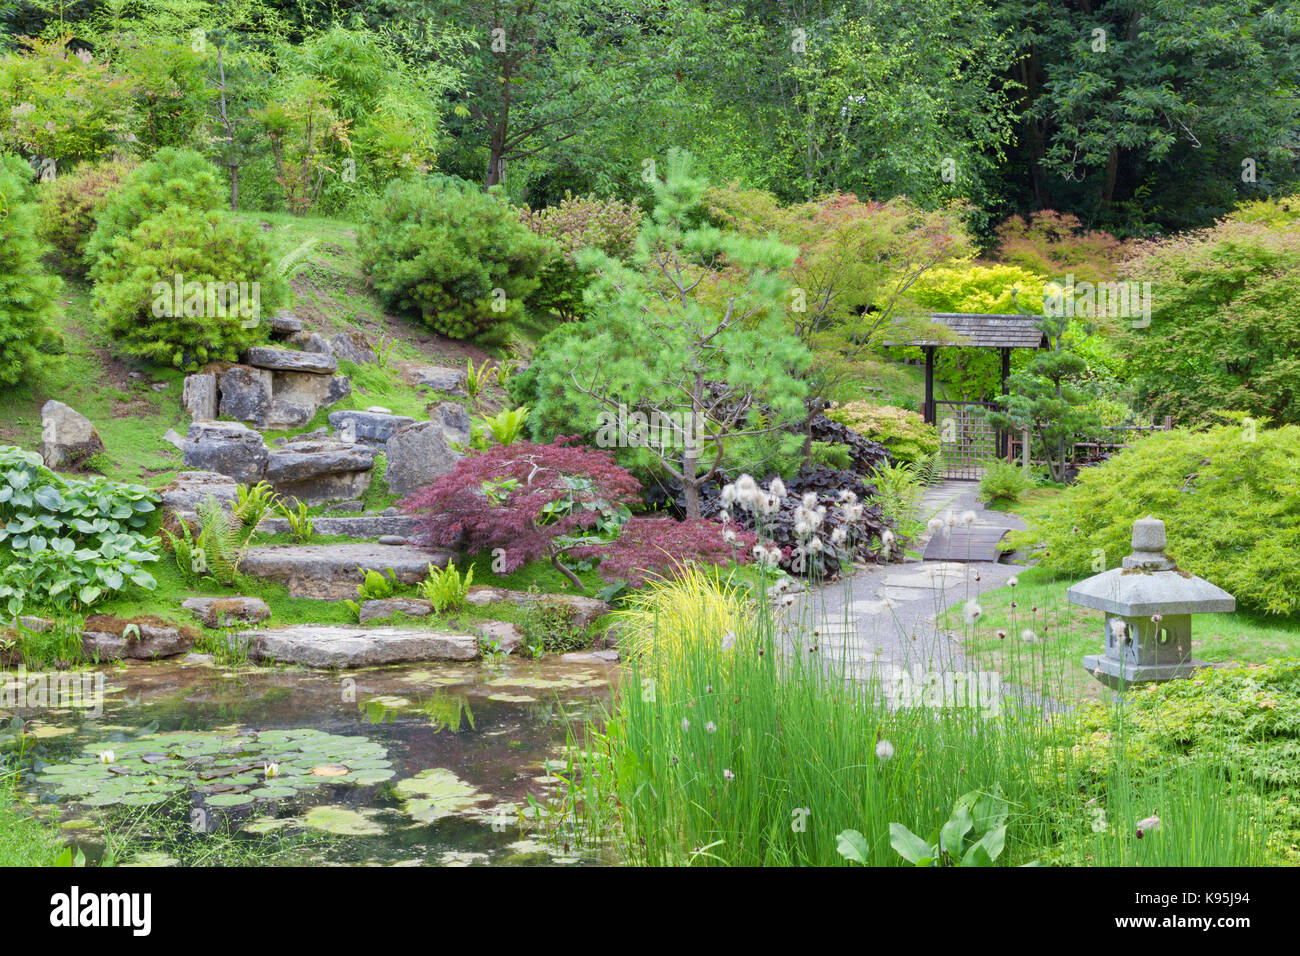 Oriental style rock garden with a small pond, stone lantern surrounded by pine, conifer, maple trees and shrubs . Stock Photo